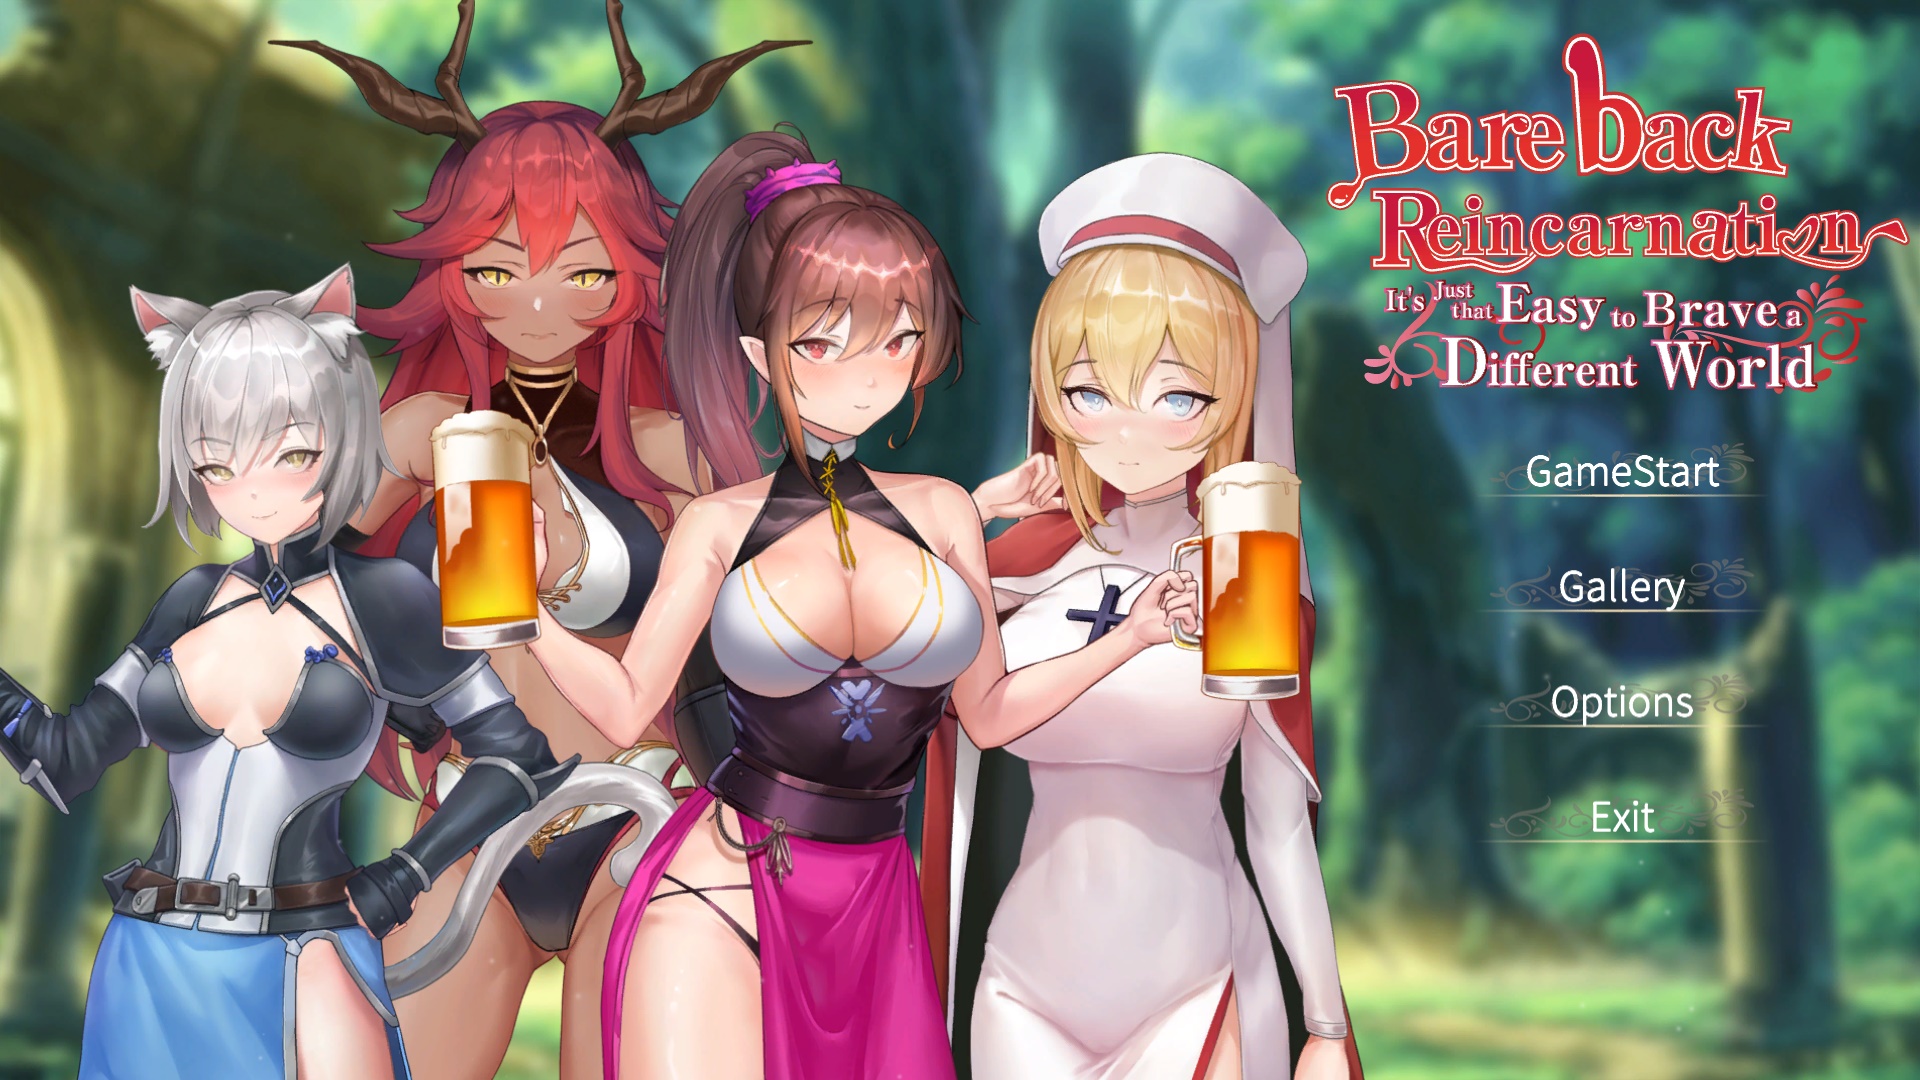 Bareback Reincarnation - It's Just That Easy to Brave a Different World [Final] [Ex-Erotia]